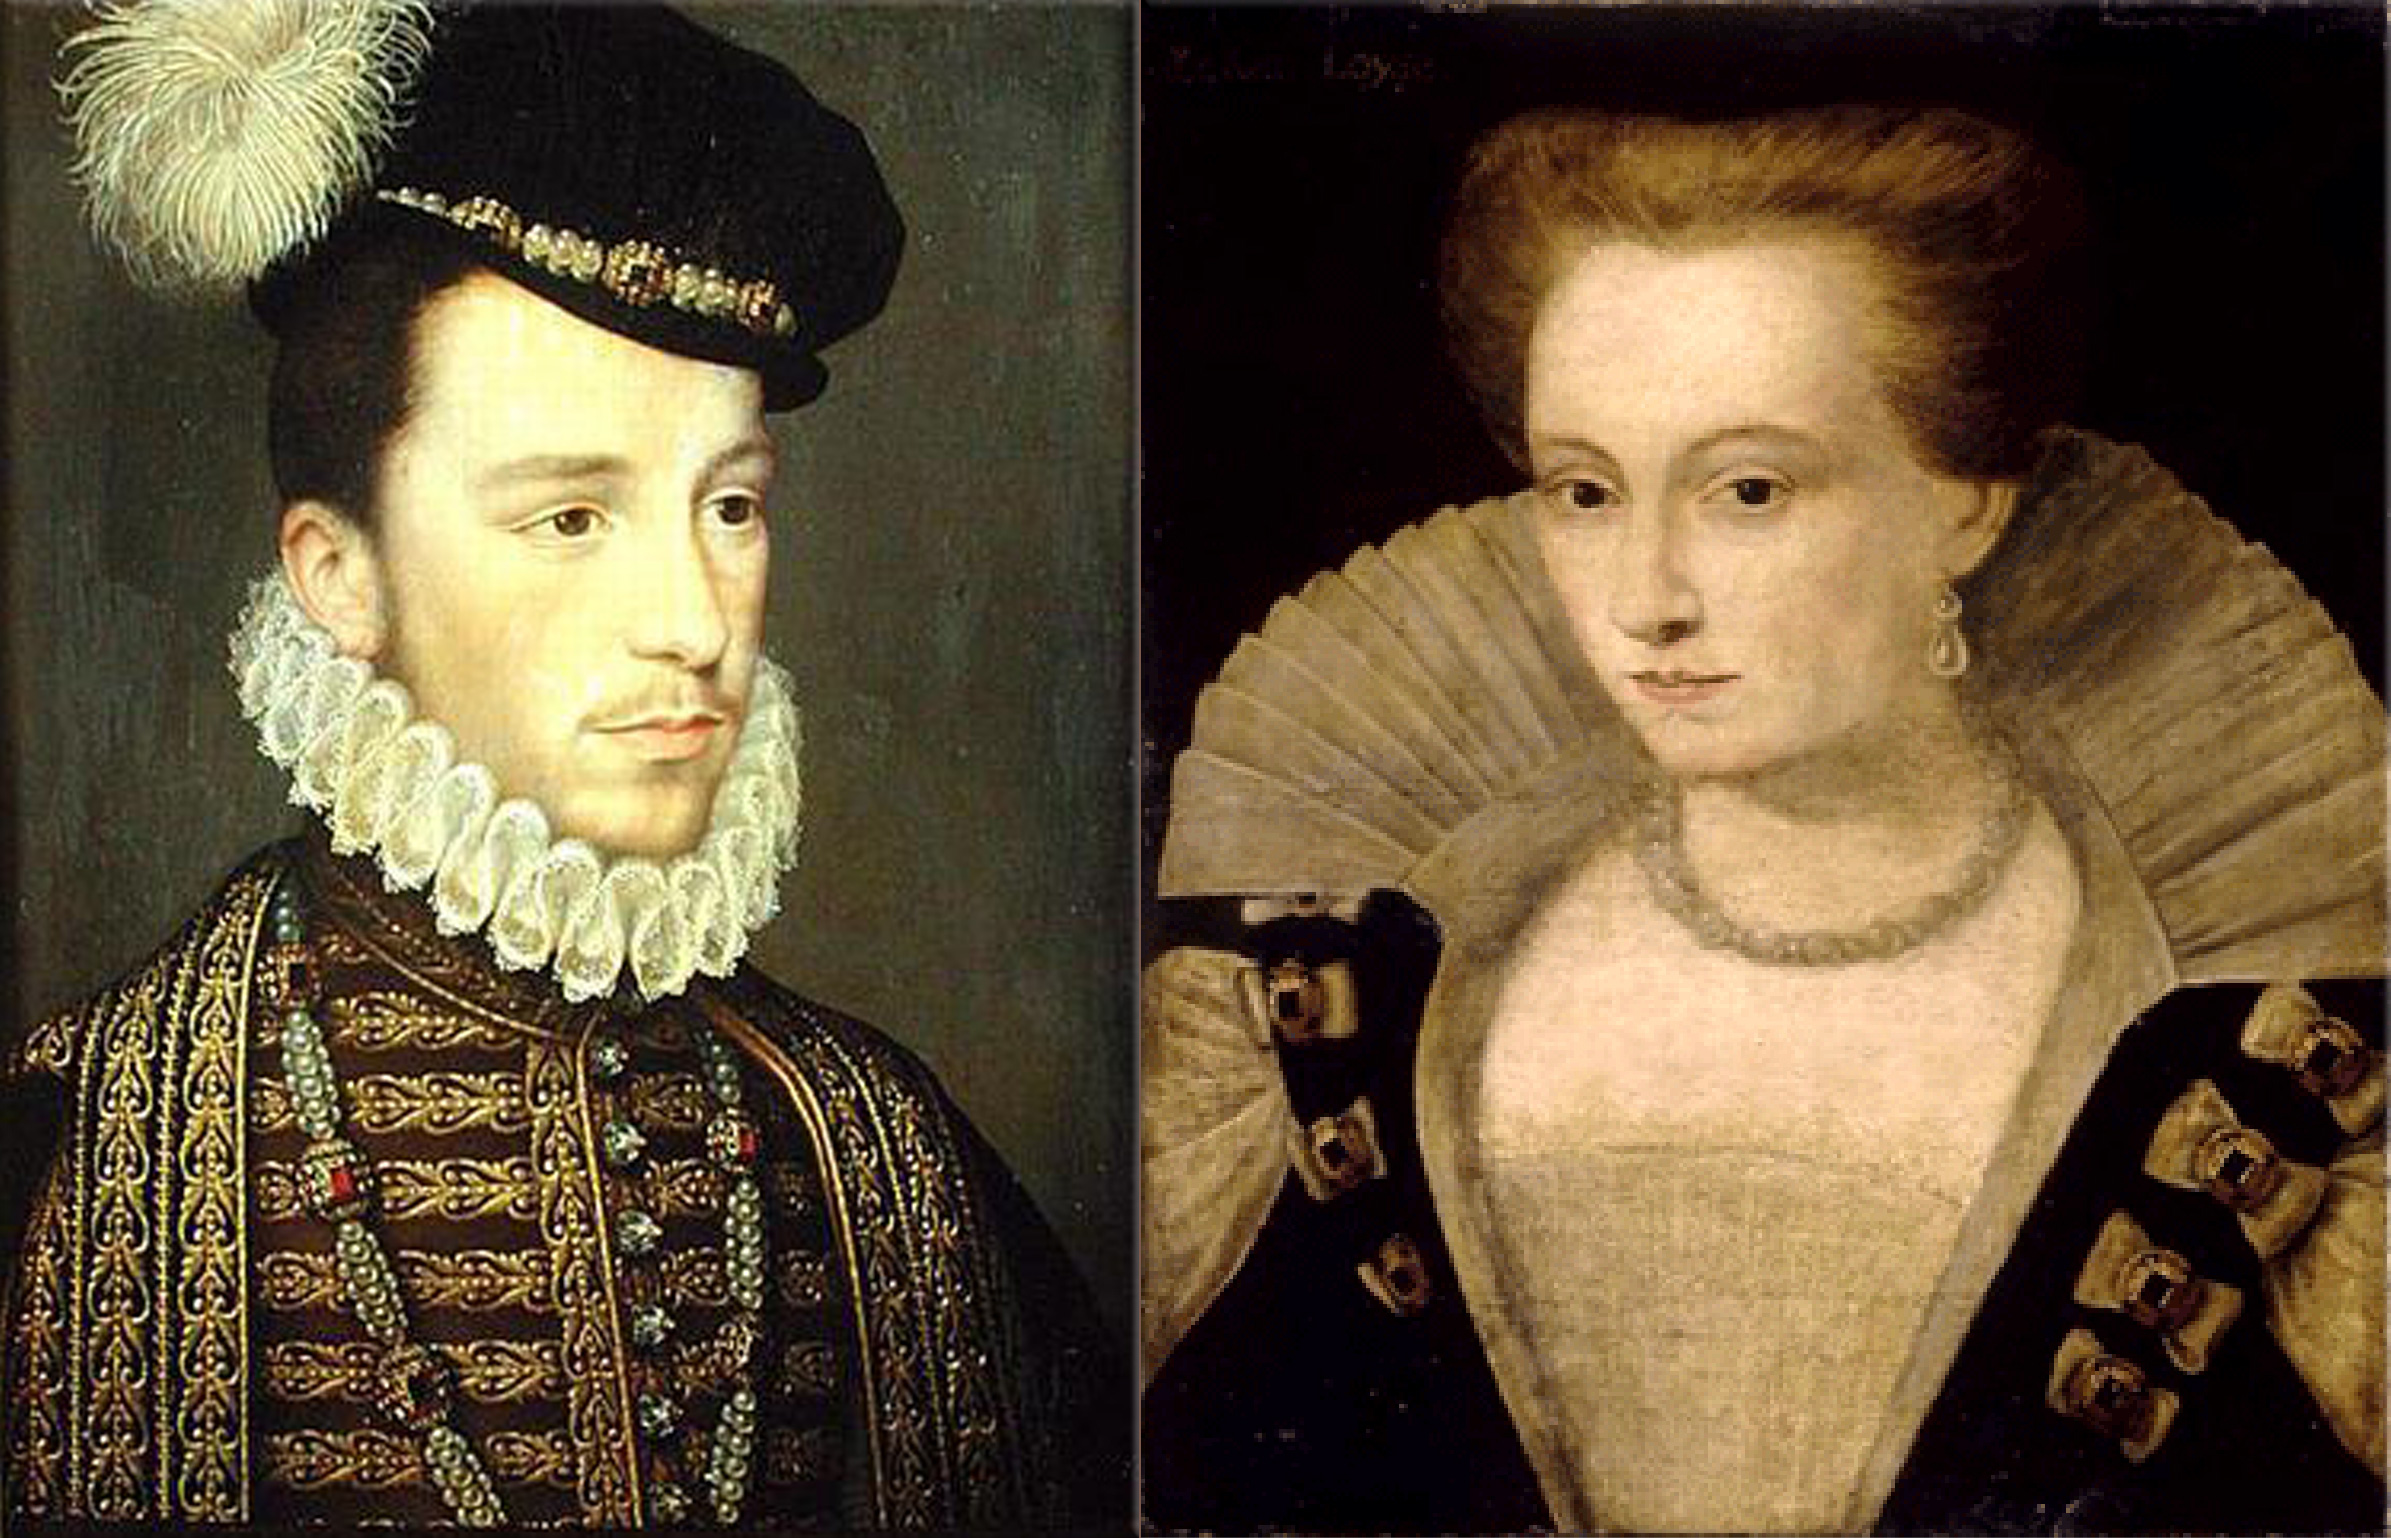 Henry III of France is crowned at Rheims, marrying Louise de Lorraine-Vaudémont on the same day